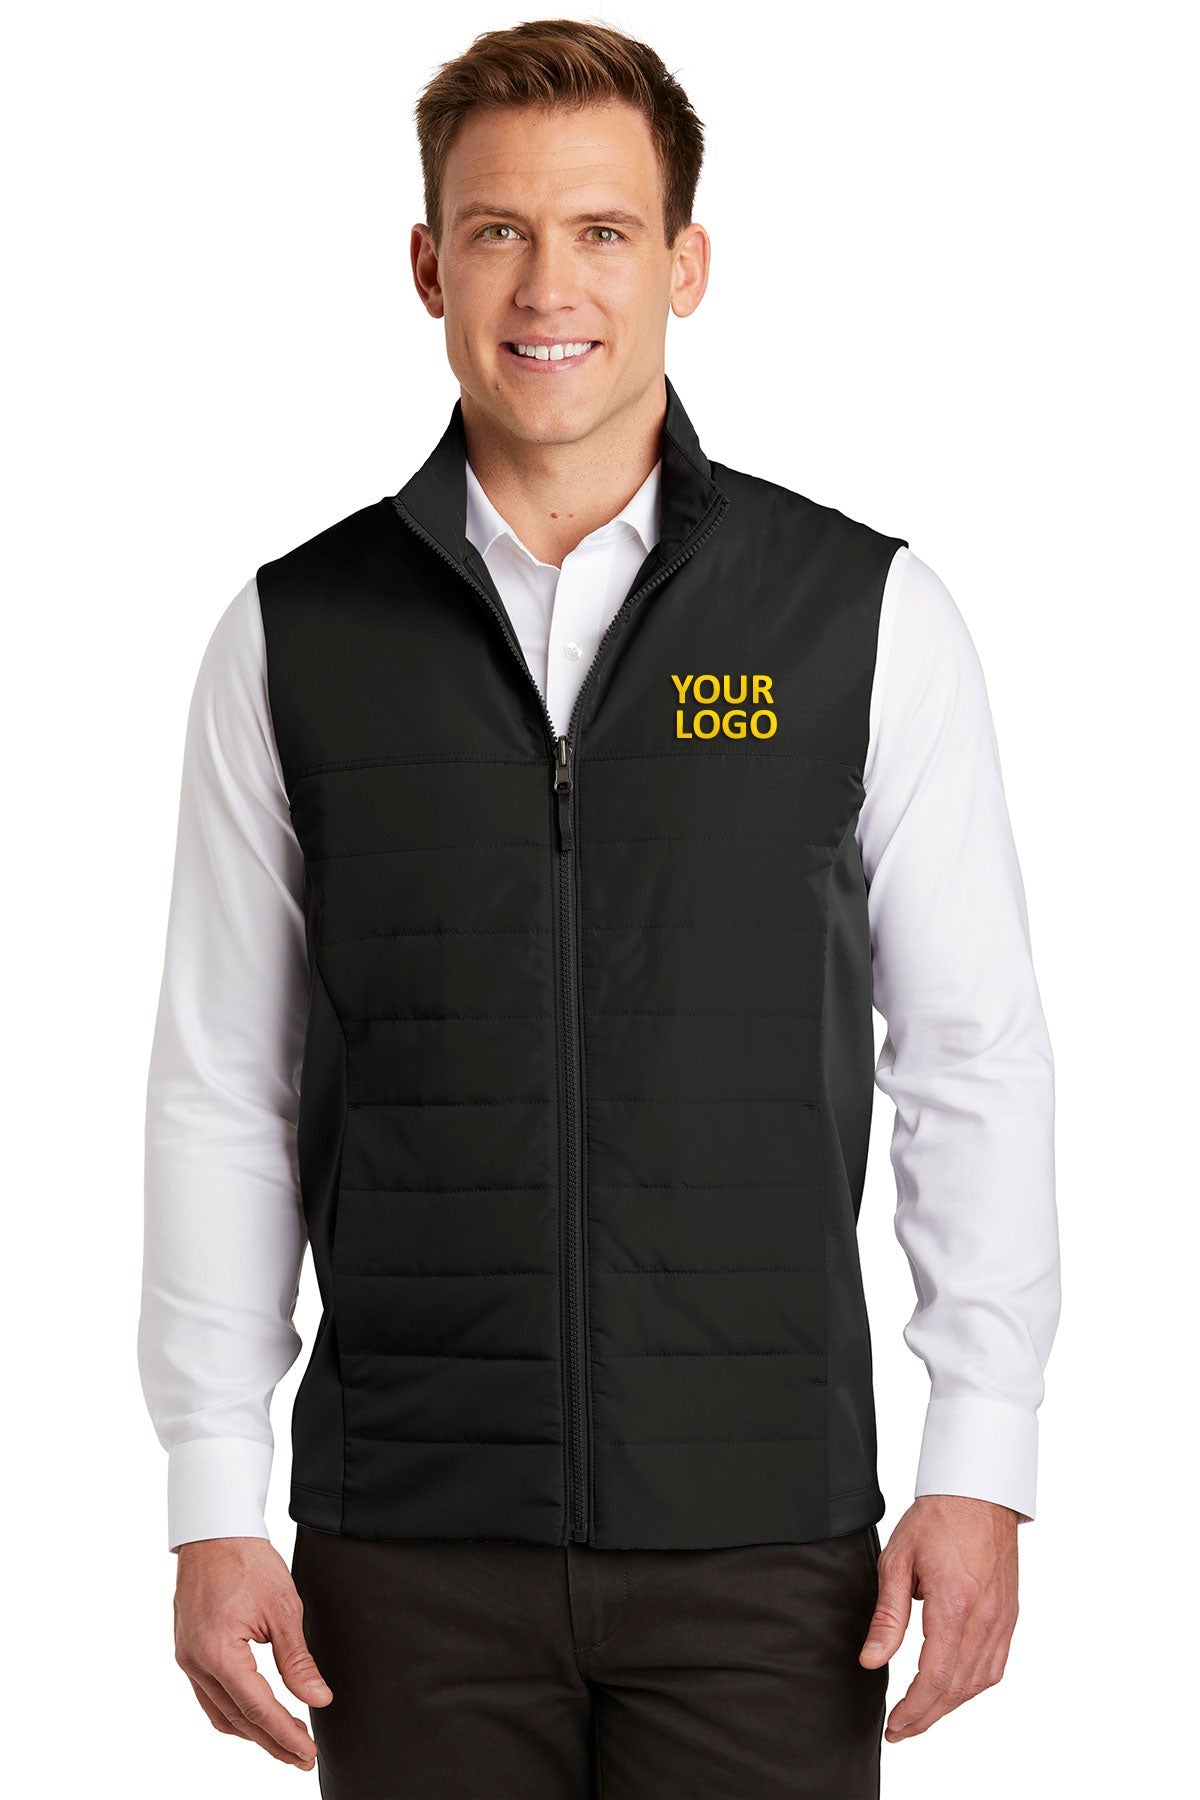 Port Authority Deep Black J903 business jackets with logo